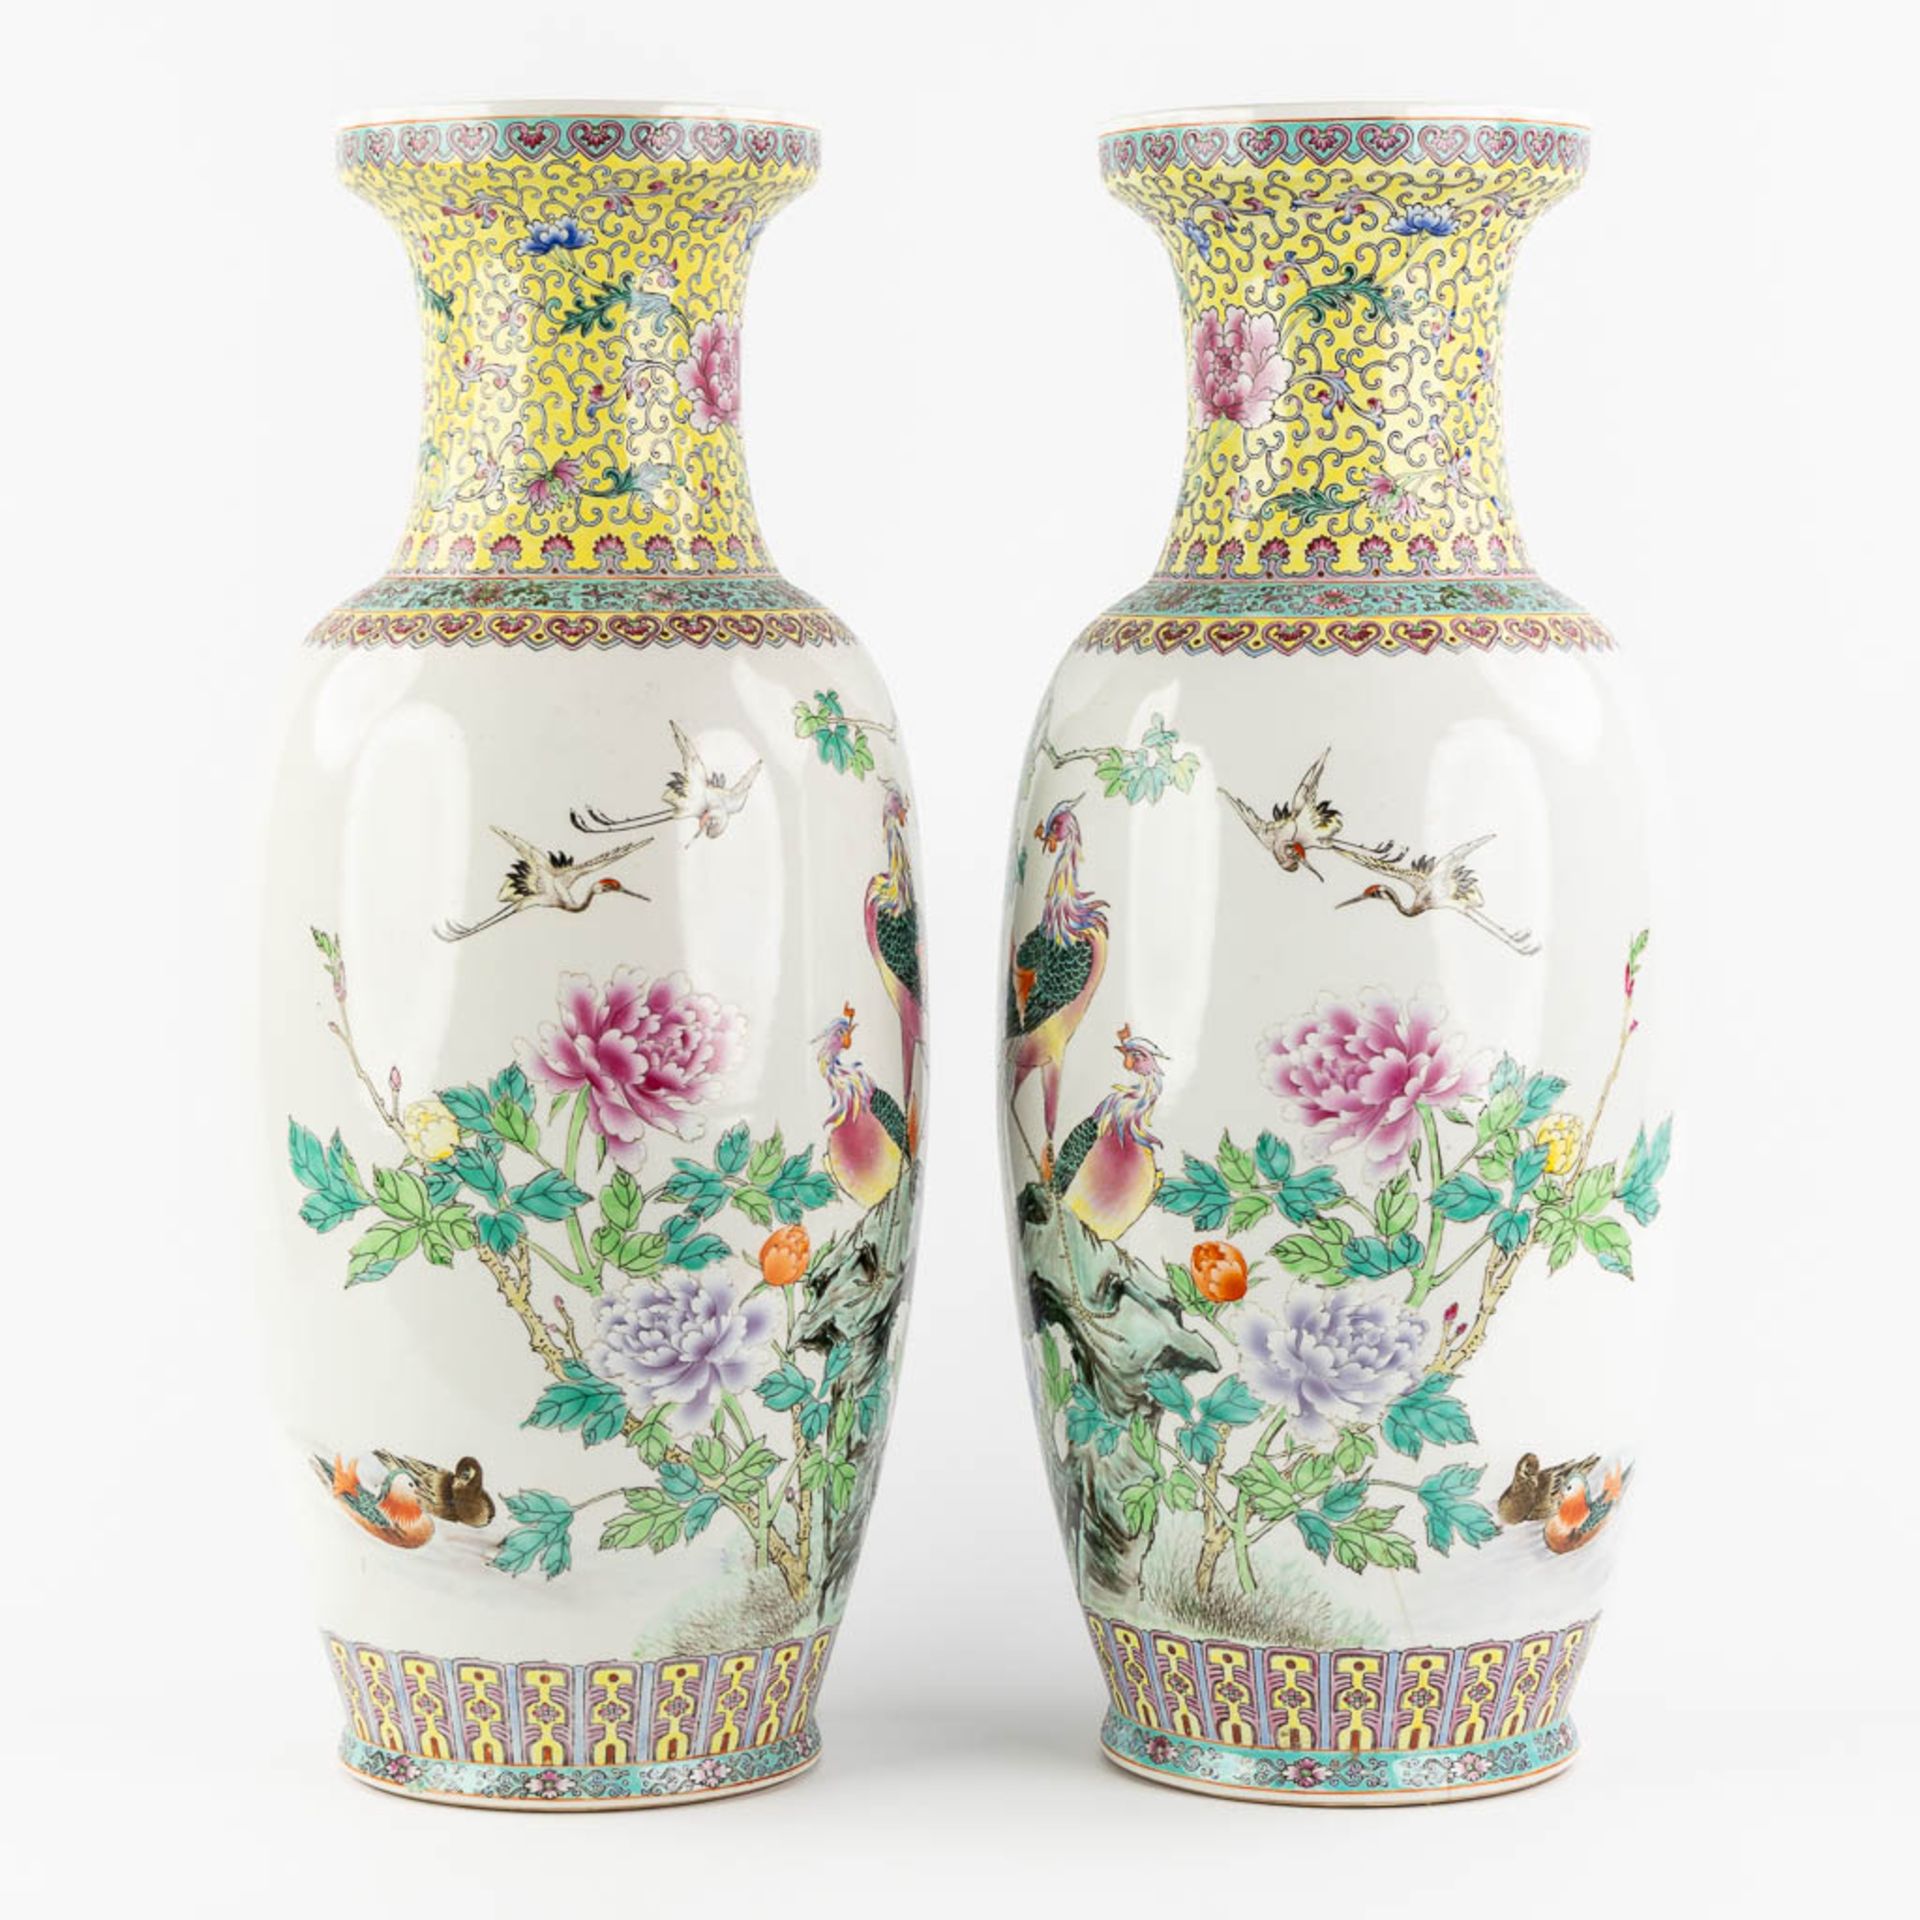 A decorative pair of Chinese vases with a Phoenix decor, 20th C. (H:62 x D:26 cm) - Image 3 of 16